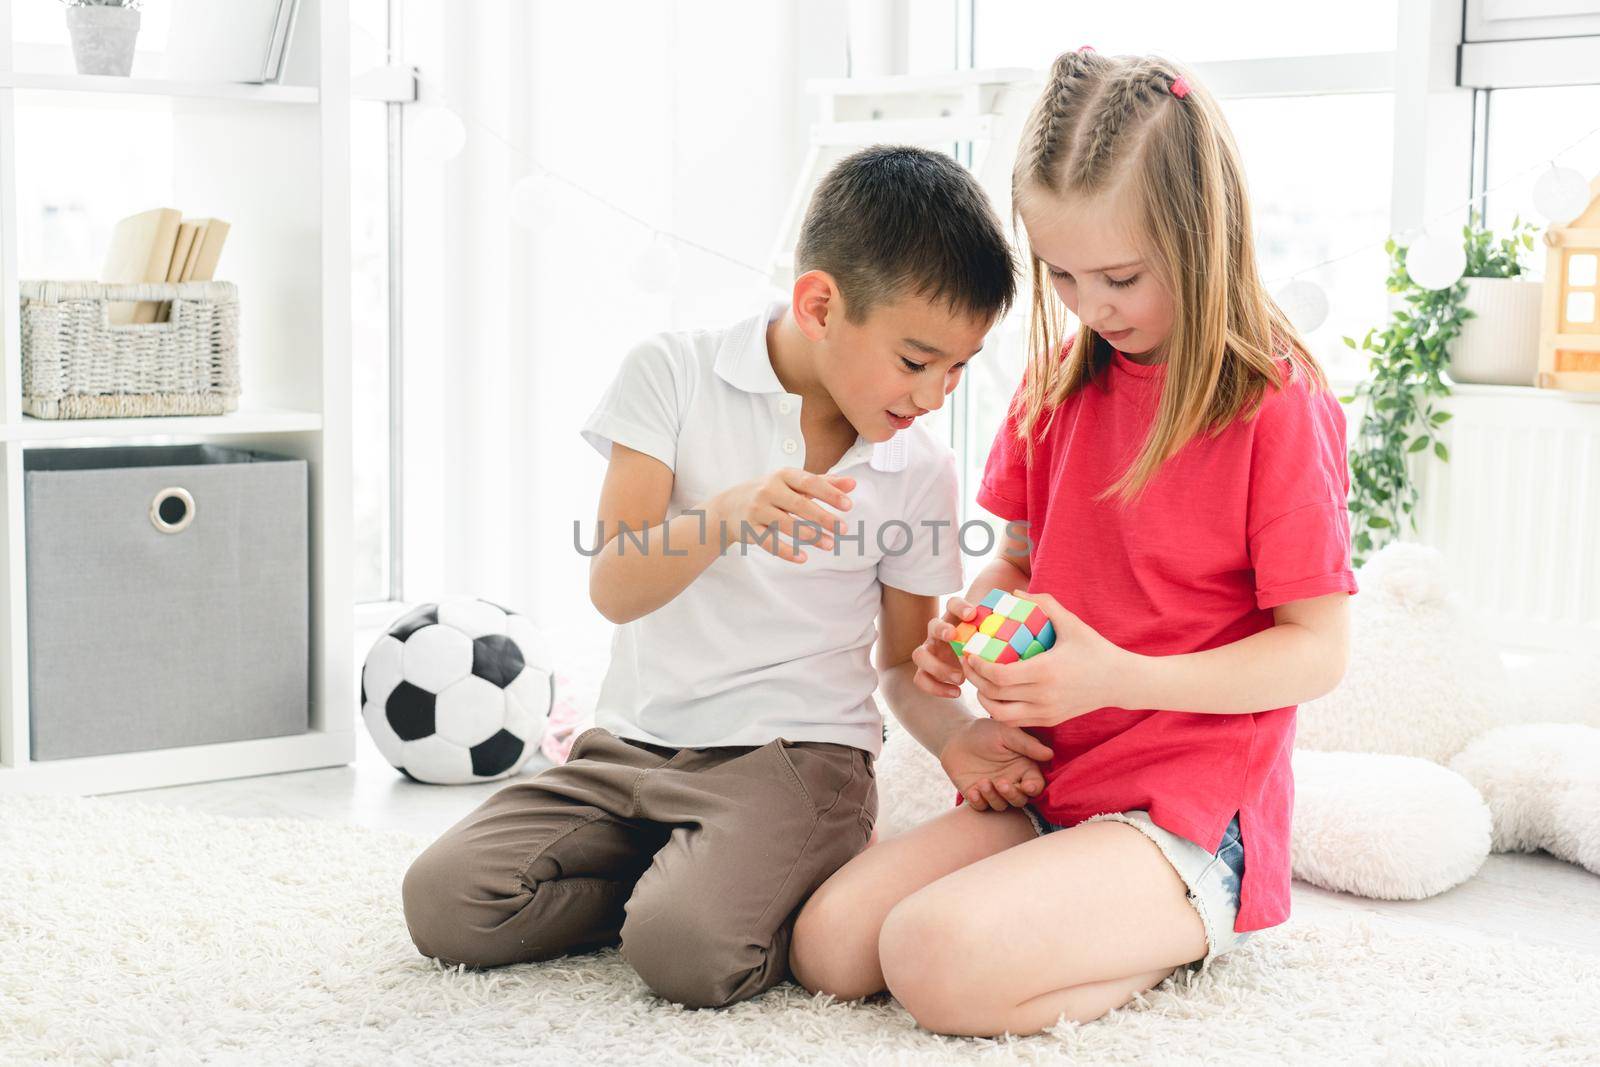 Cute girl and boy kids solving with rubik's cube in light room